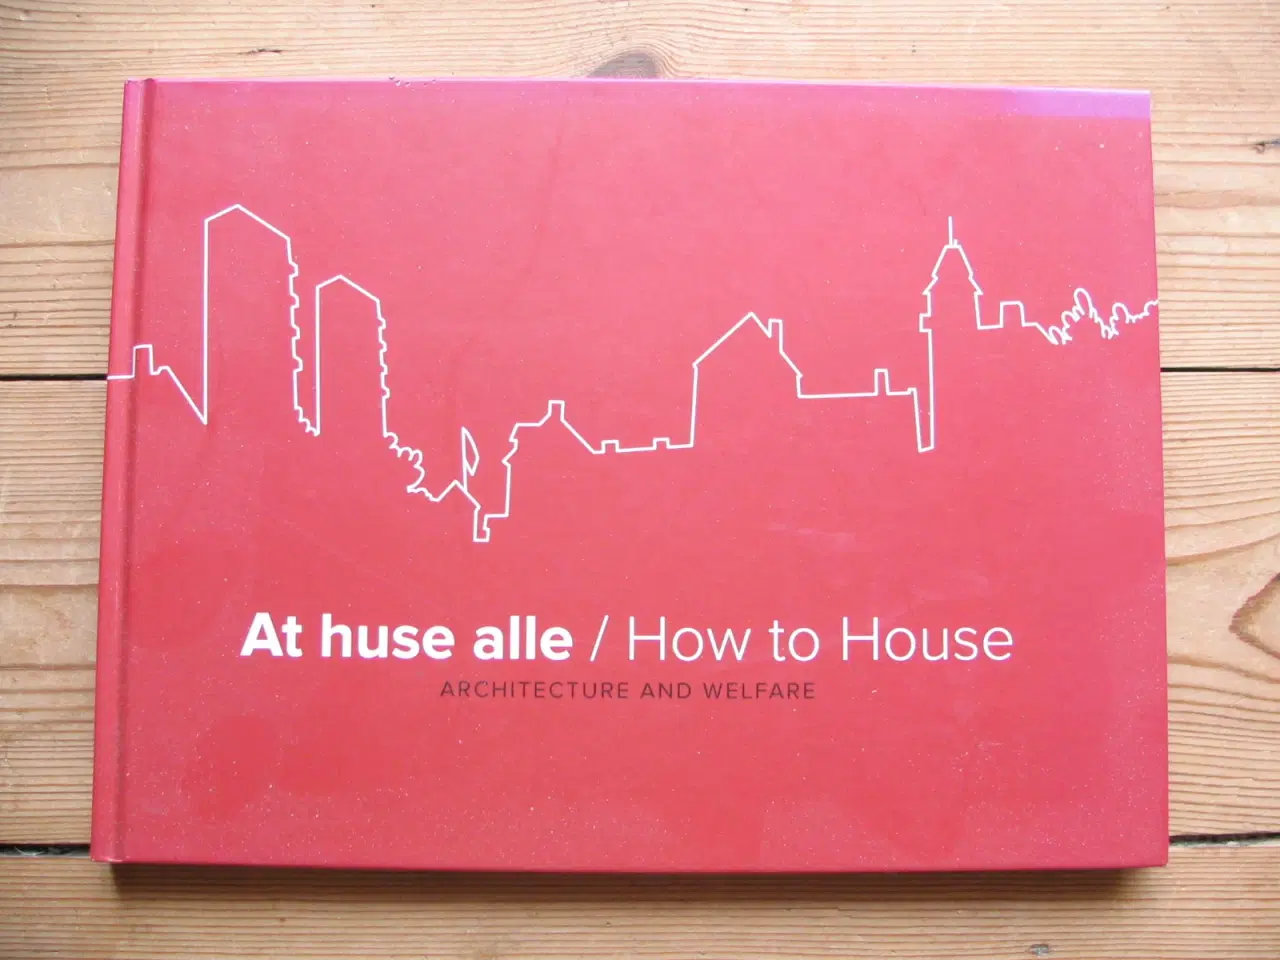 Billede 1 - At huse alle/ How to House